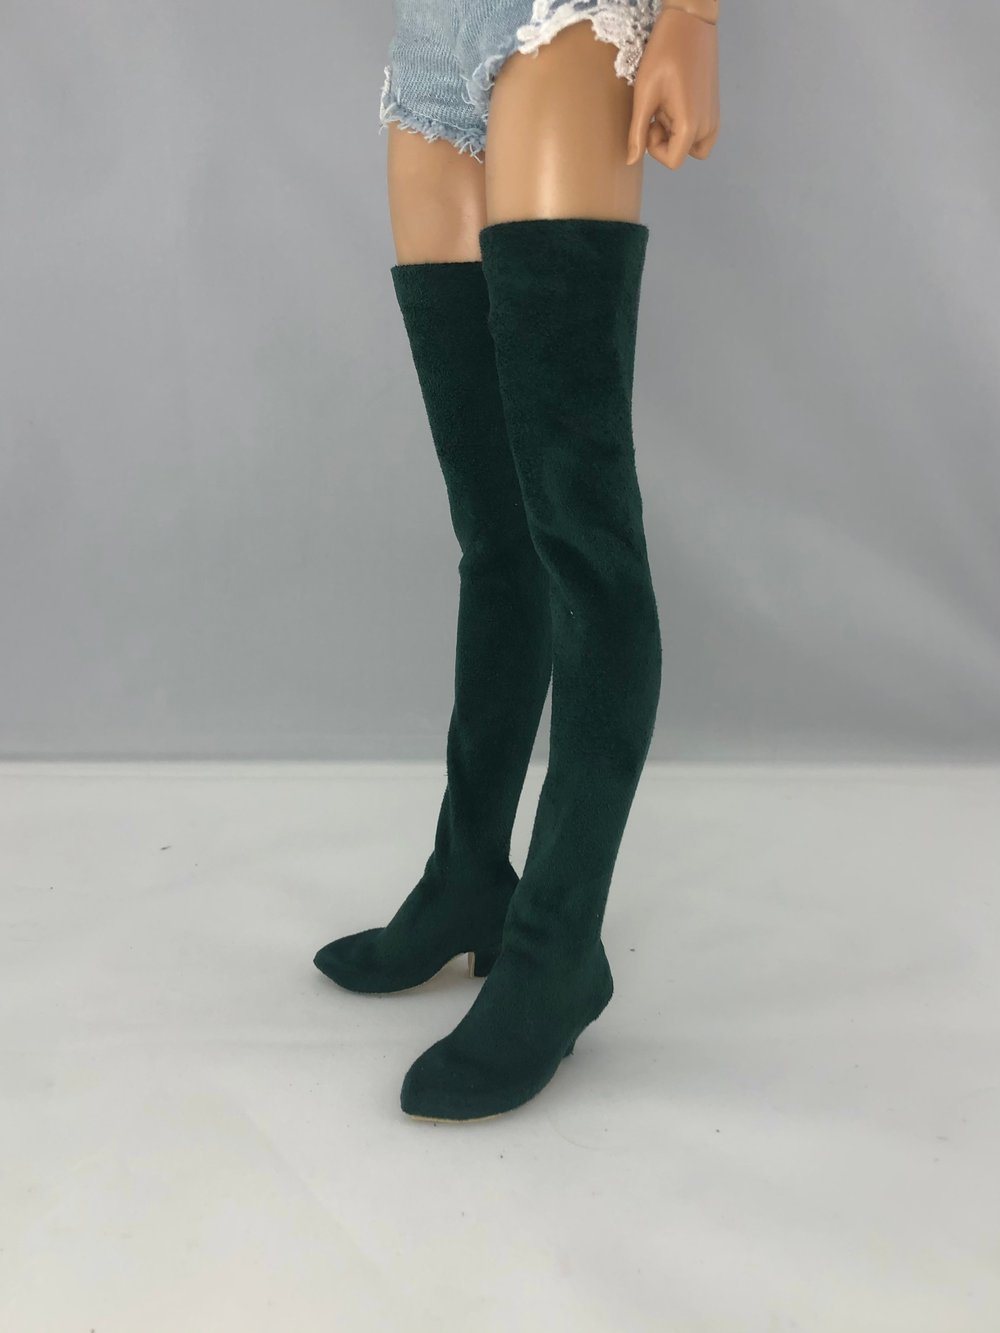 Emerald Suede Thigh High Boots: Minifee 